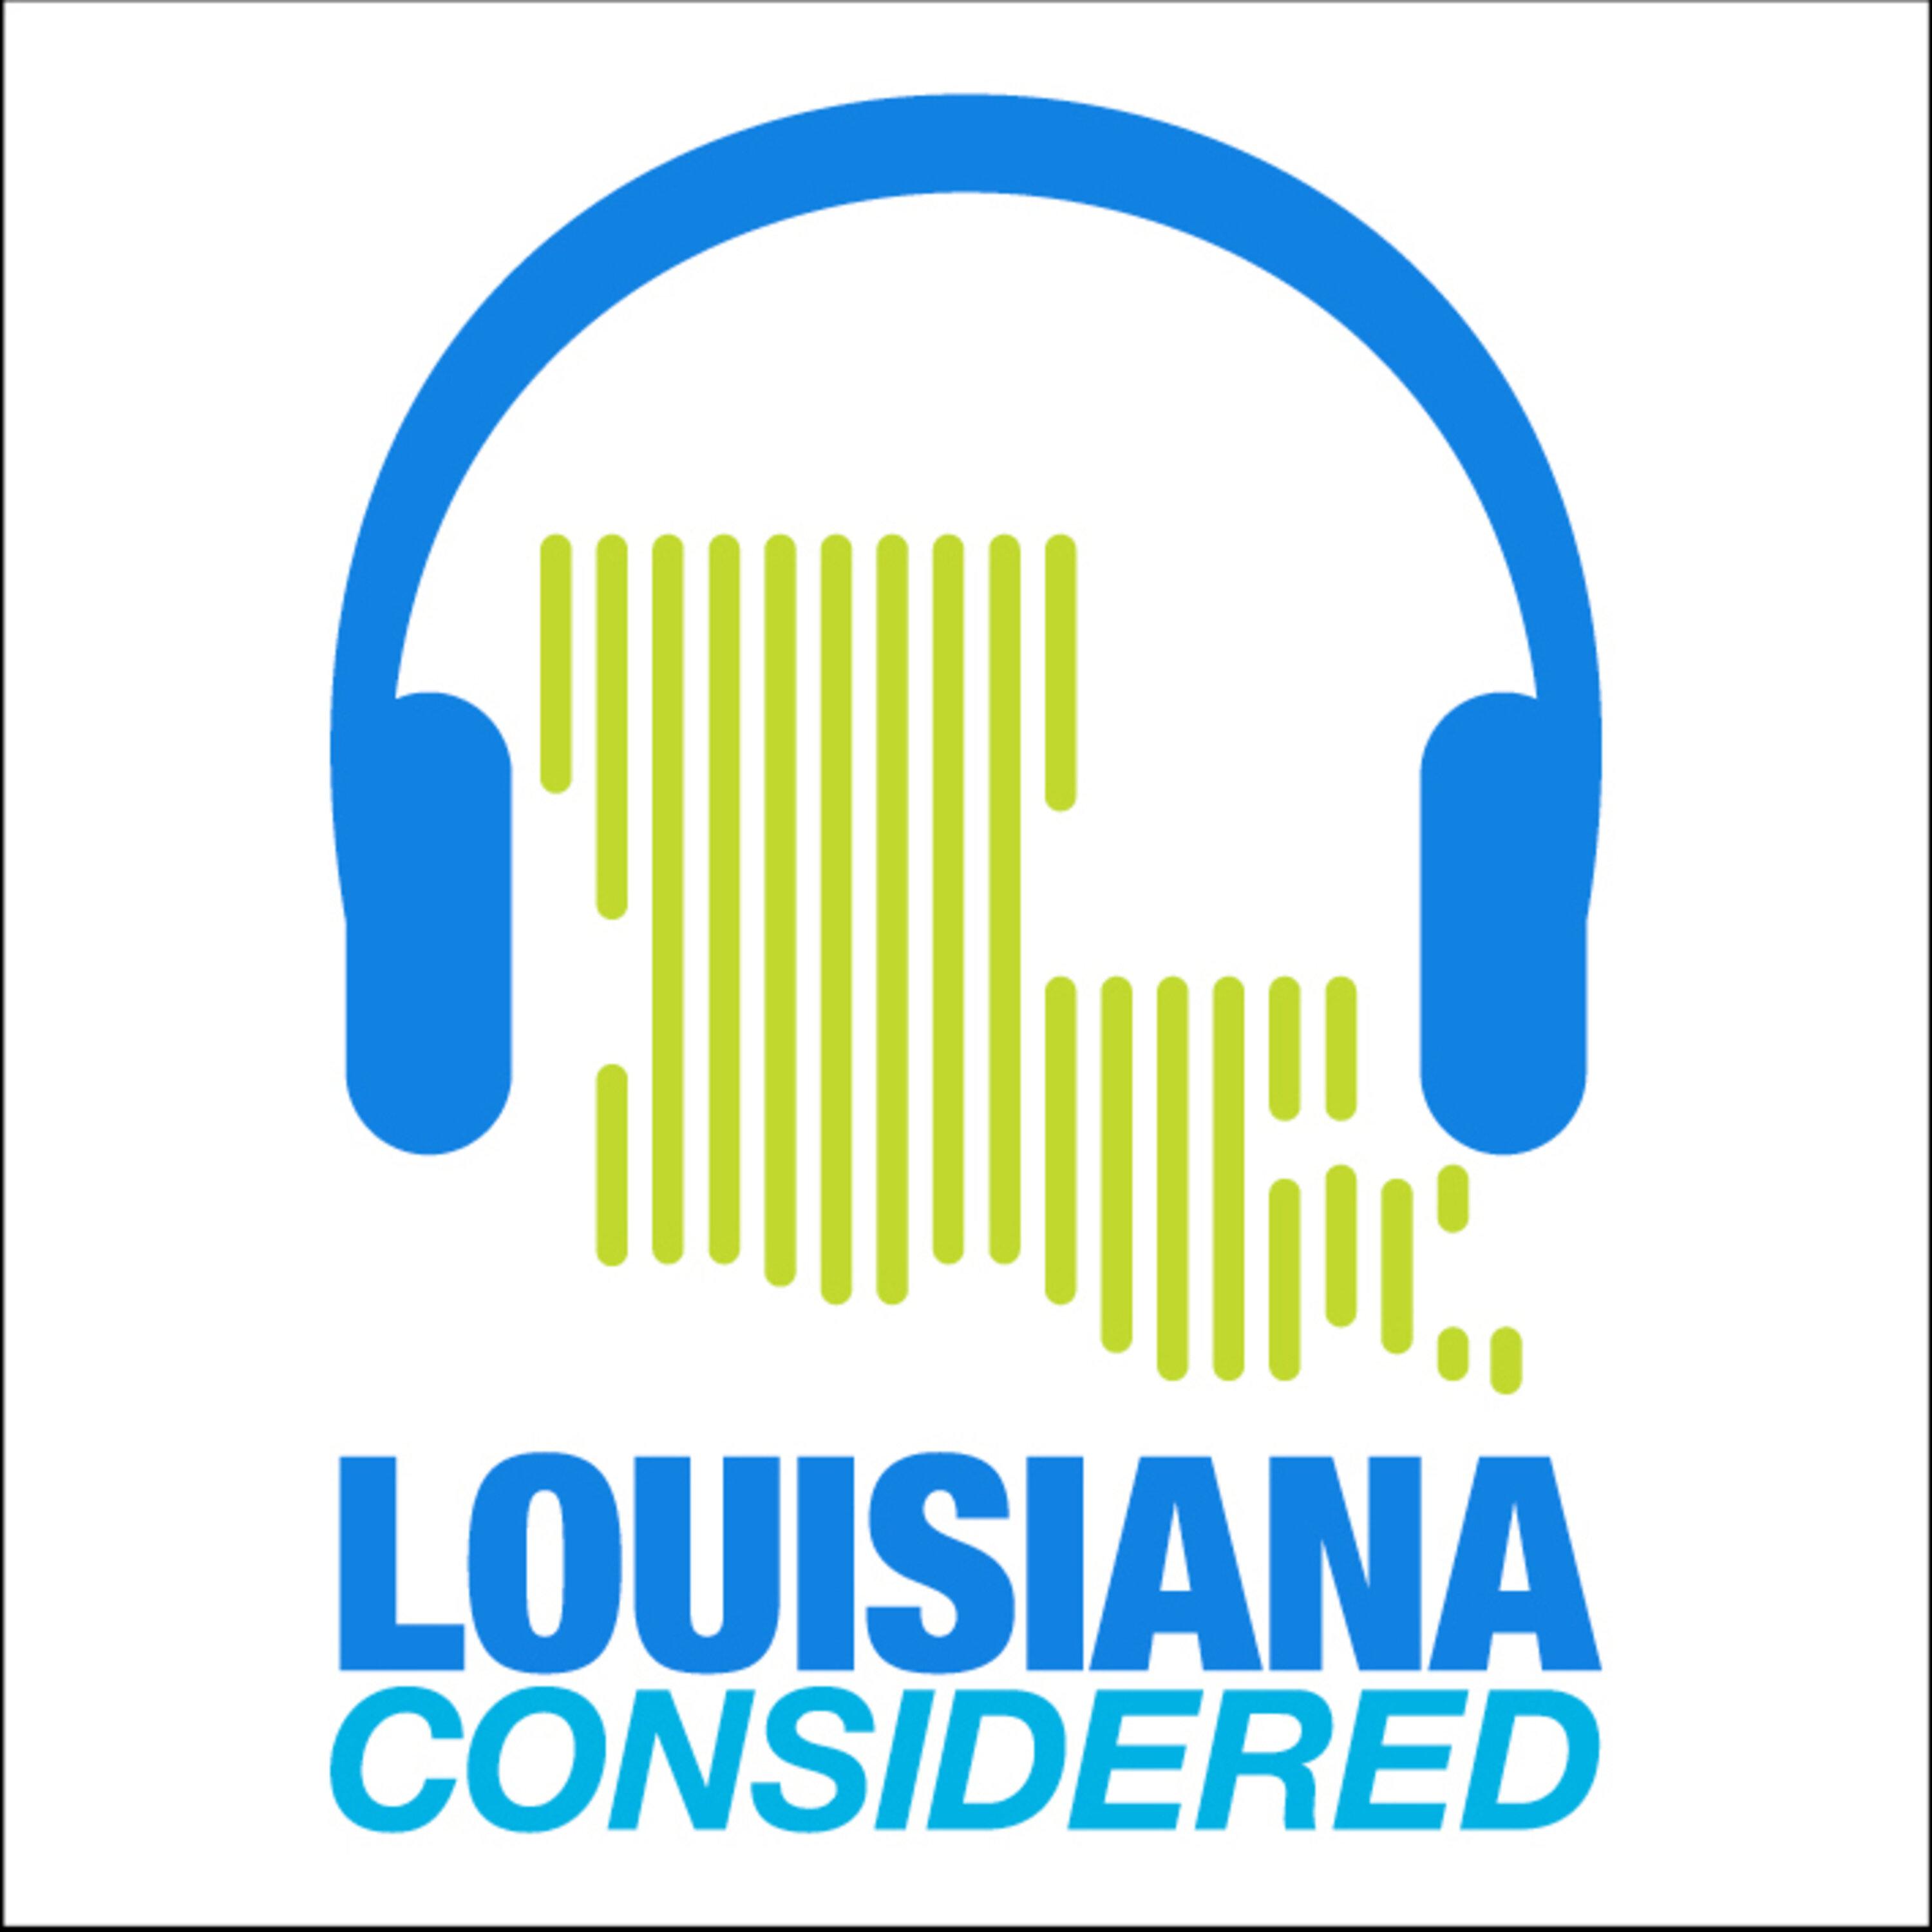 Thumbnail for "Louisiana Considered: Court Watch NOLA Releases Annual Report, The Activists Cleaning Up Lincoln Beach, The Music Inside Out Sessions".